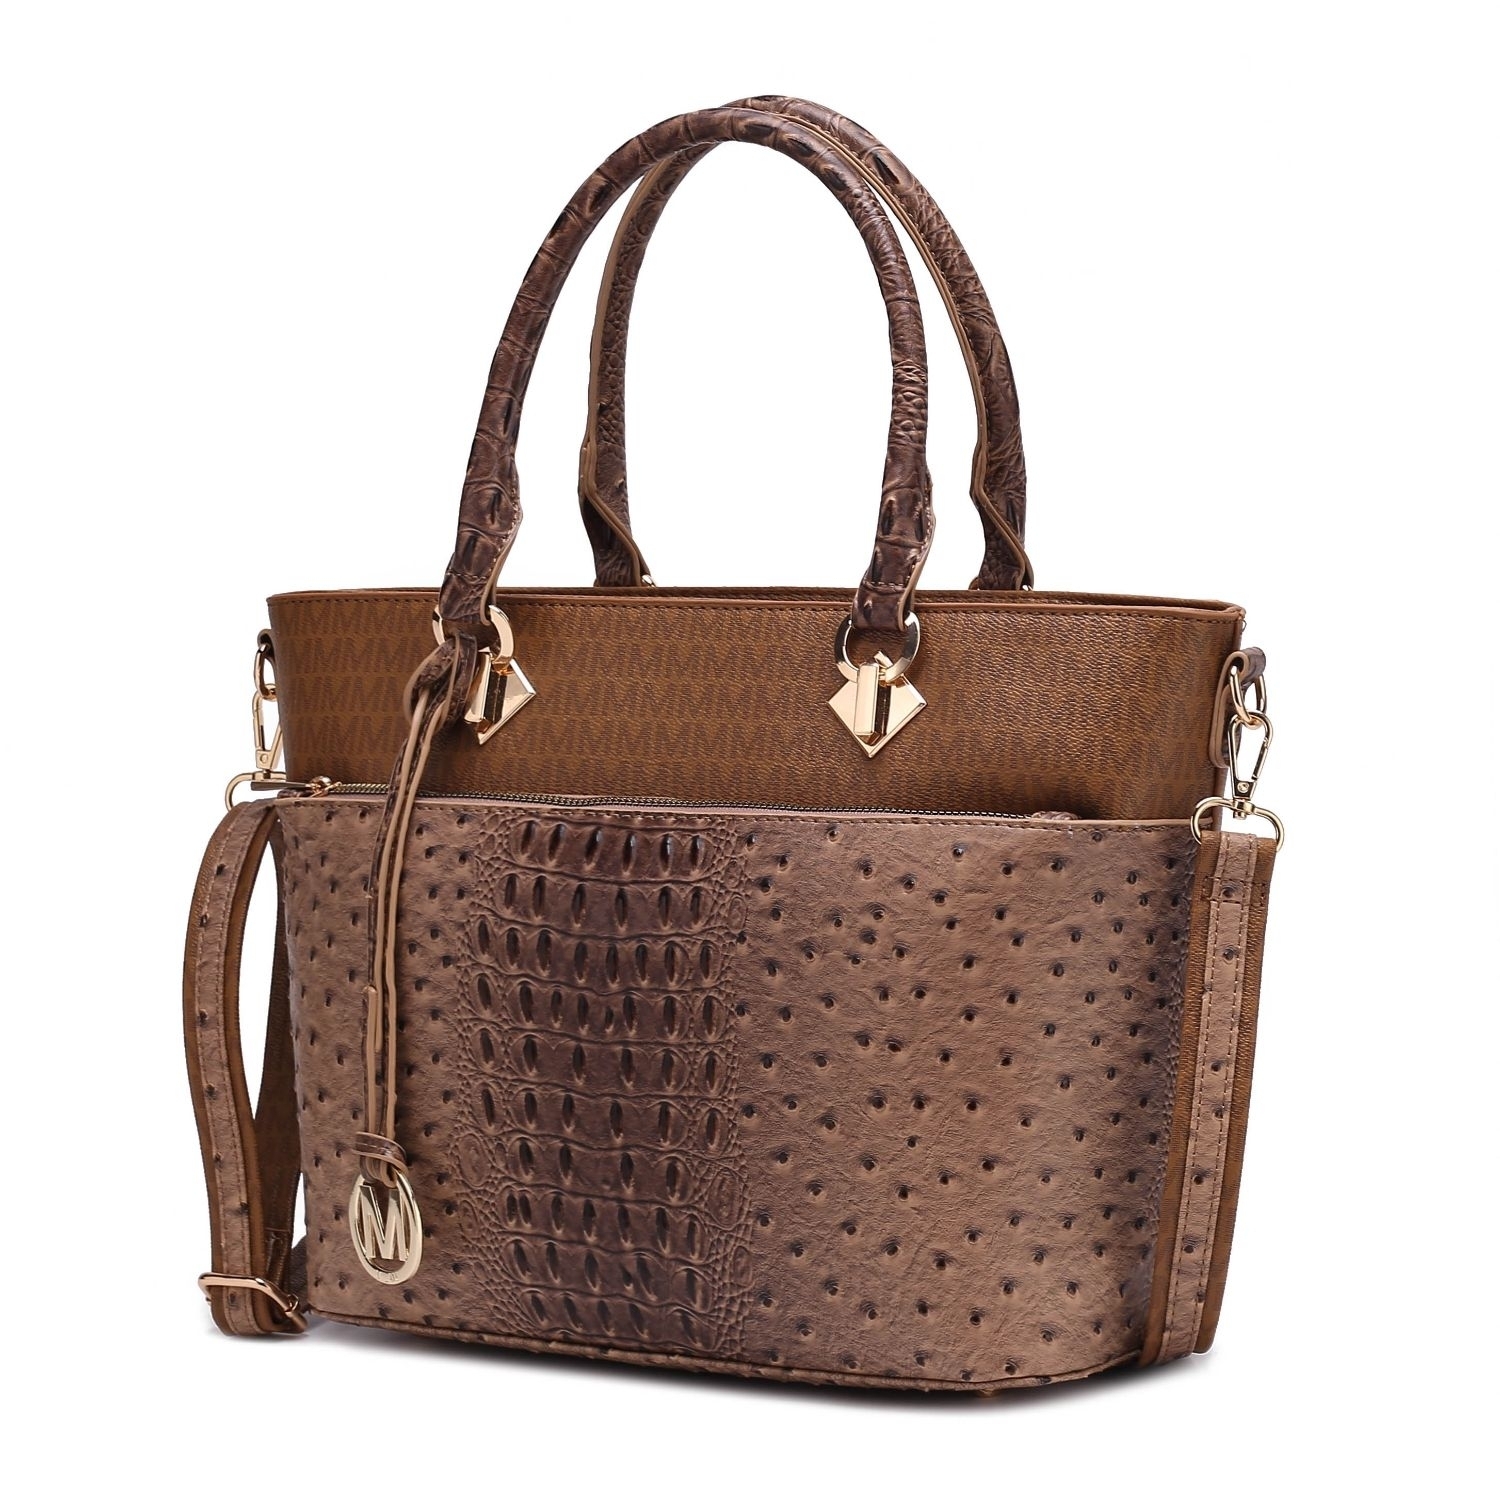 MKF Collection Grace Signature And Croc Embossed Tote Handbag By Mia K. - Tan